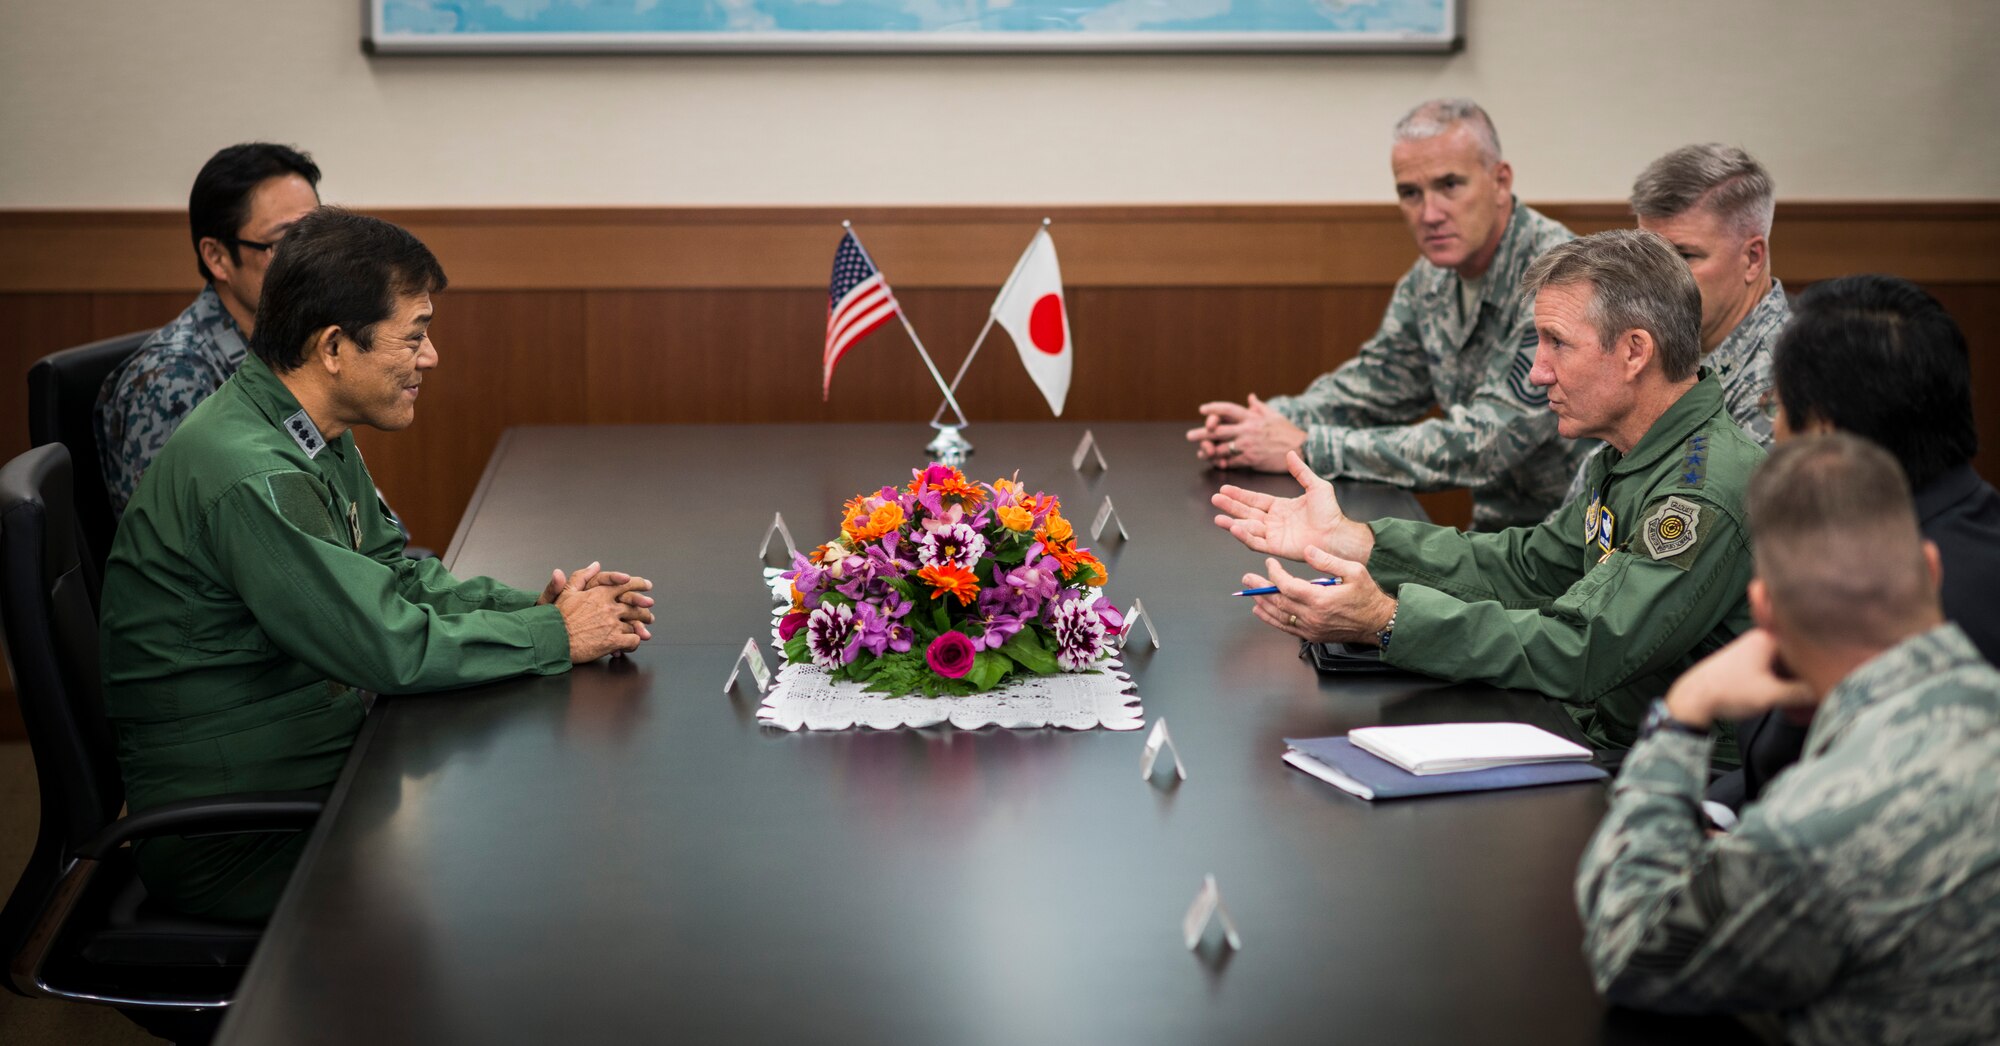 YOKOTA AIR BASE, Japan -- Gen. Herbert J. "Hawk" Carlisle, right, Pacific Air Forces commander, talks about bilateral military relations with Japan Air Self-Defense Force Lt. Gen. Harukazu Saitoh, Air Defense Command commander, during a visit to the ADC headquarters building at Yokota Air Base, Japan, Oct. 23, 2012. This was Carlisle's first visit to the new ADC headquarters. (U.S. Air Force photo by Tech. Sgt. Samuel Morse)